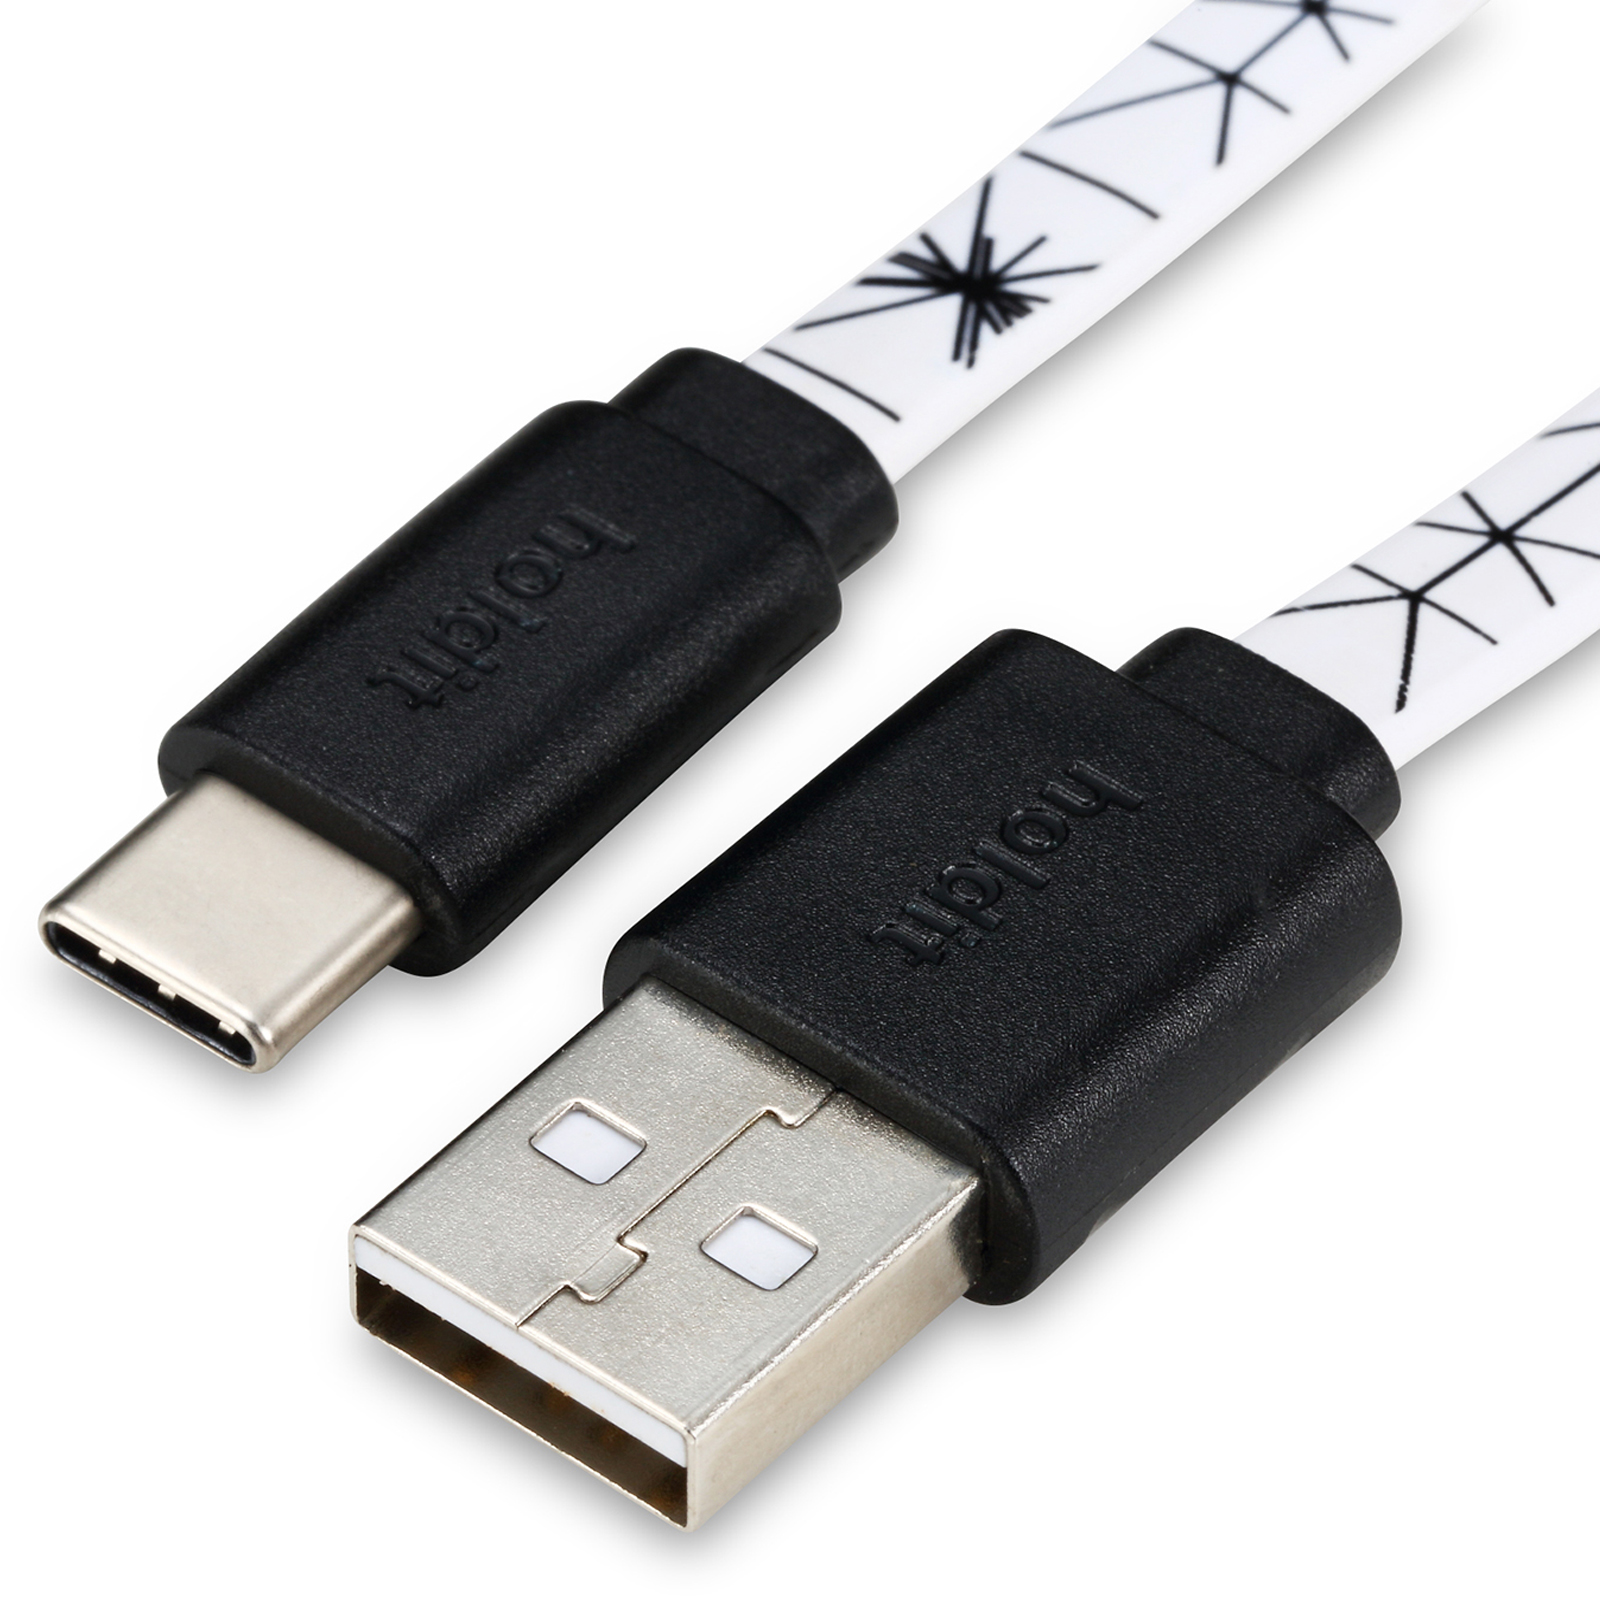 Usb kabel, style micro-usb 2m, superstar wite